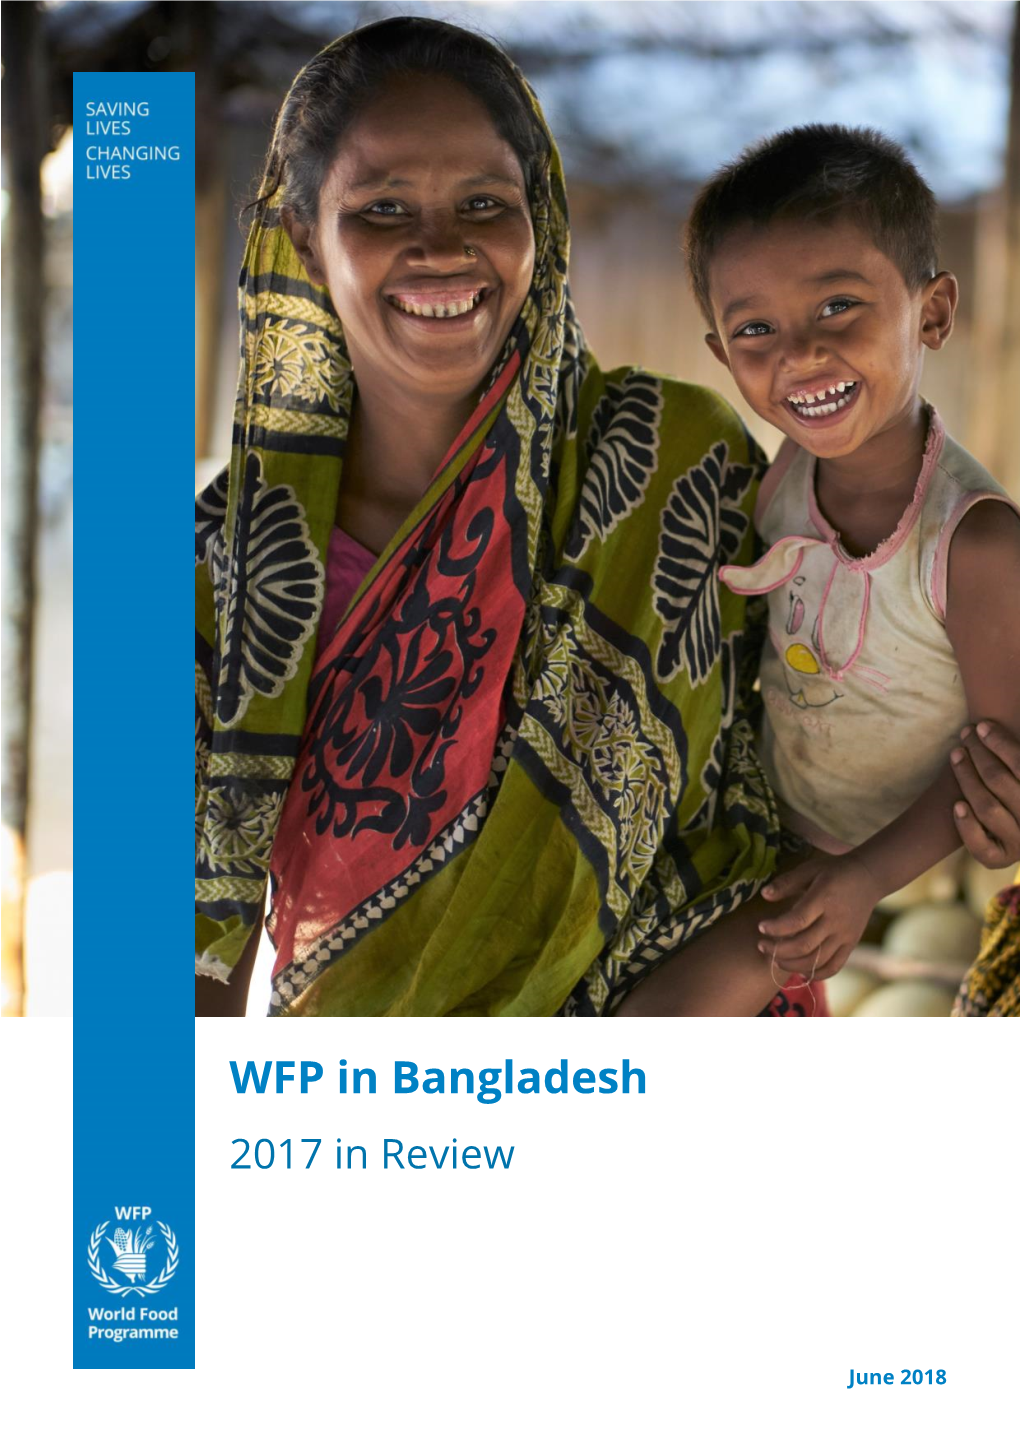 WFP in Bangladesh 2017 in Review